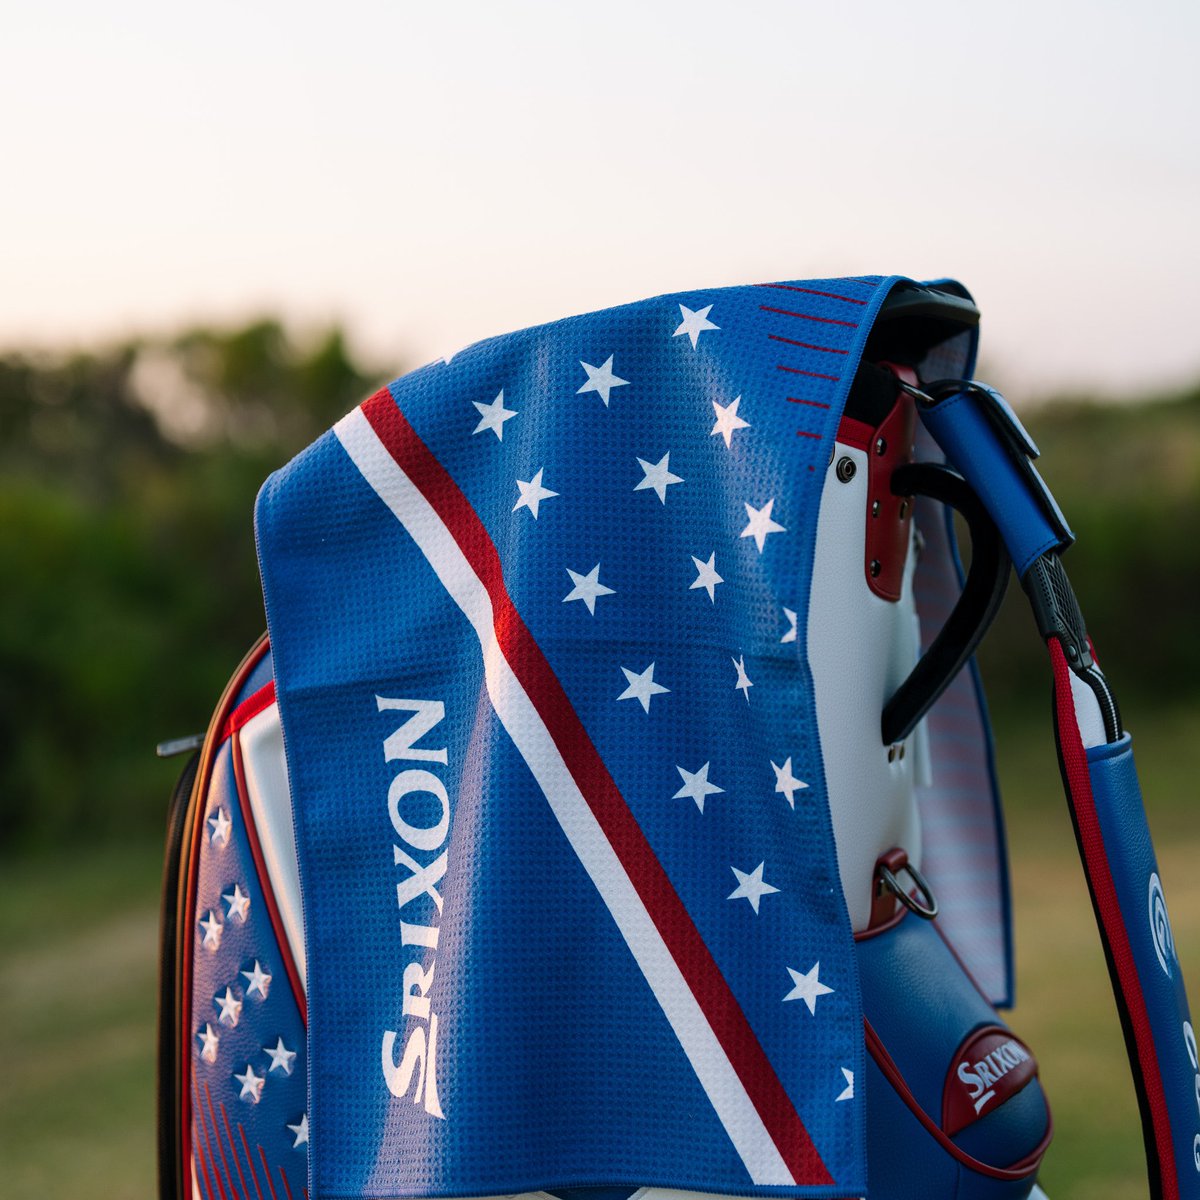 I’ve teamed up with Srixon Europe to offer 1 follower the chance to win a Limited Edition U.S. Open Major themed Srixon stand bag, headcover and towel.  To enter all you have to do is:  ✅Follow me and @srixoneurope  ✅Tag 2 friends in the comments below and tell us which Srixon…